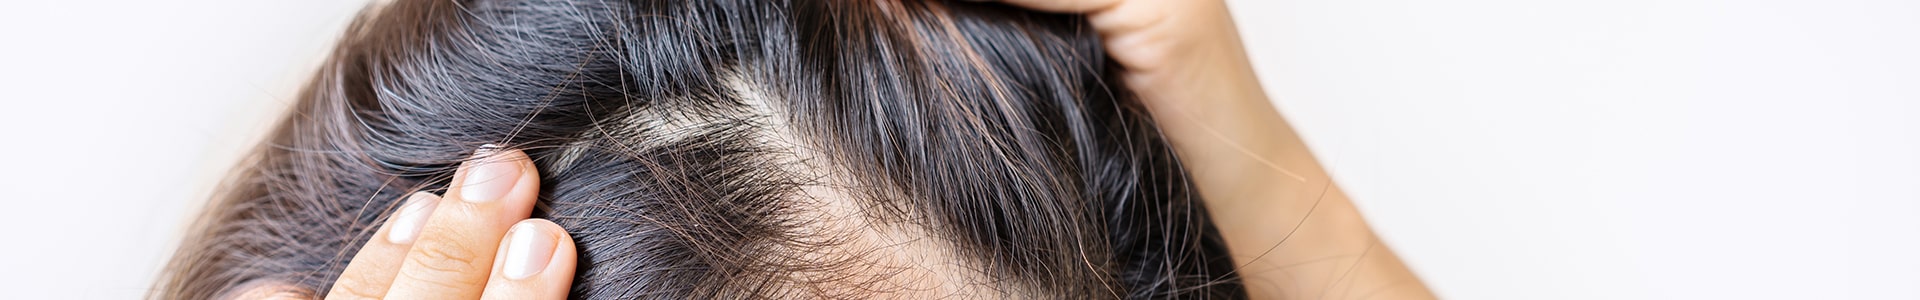 Effective Hair Loss Treatments by Dr. Steffes